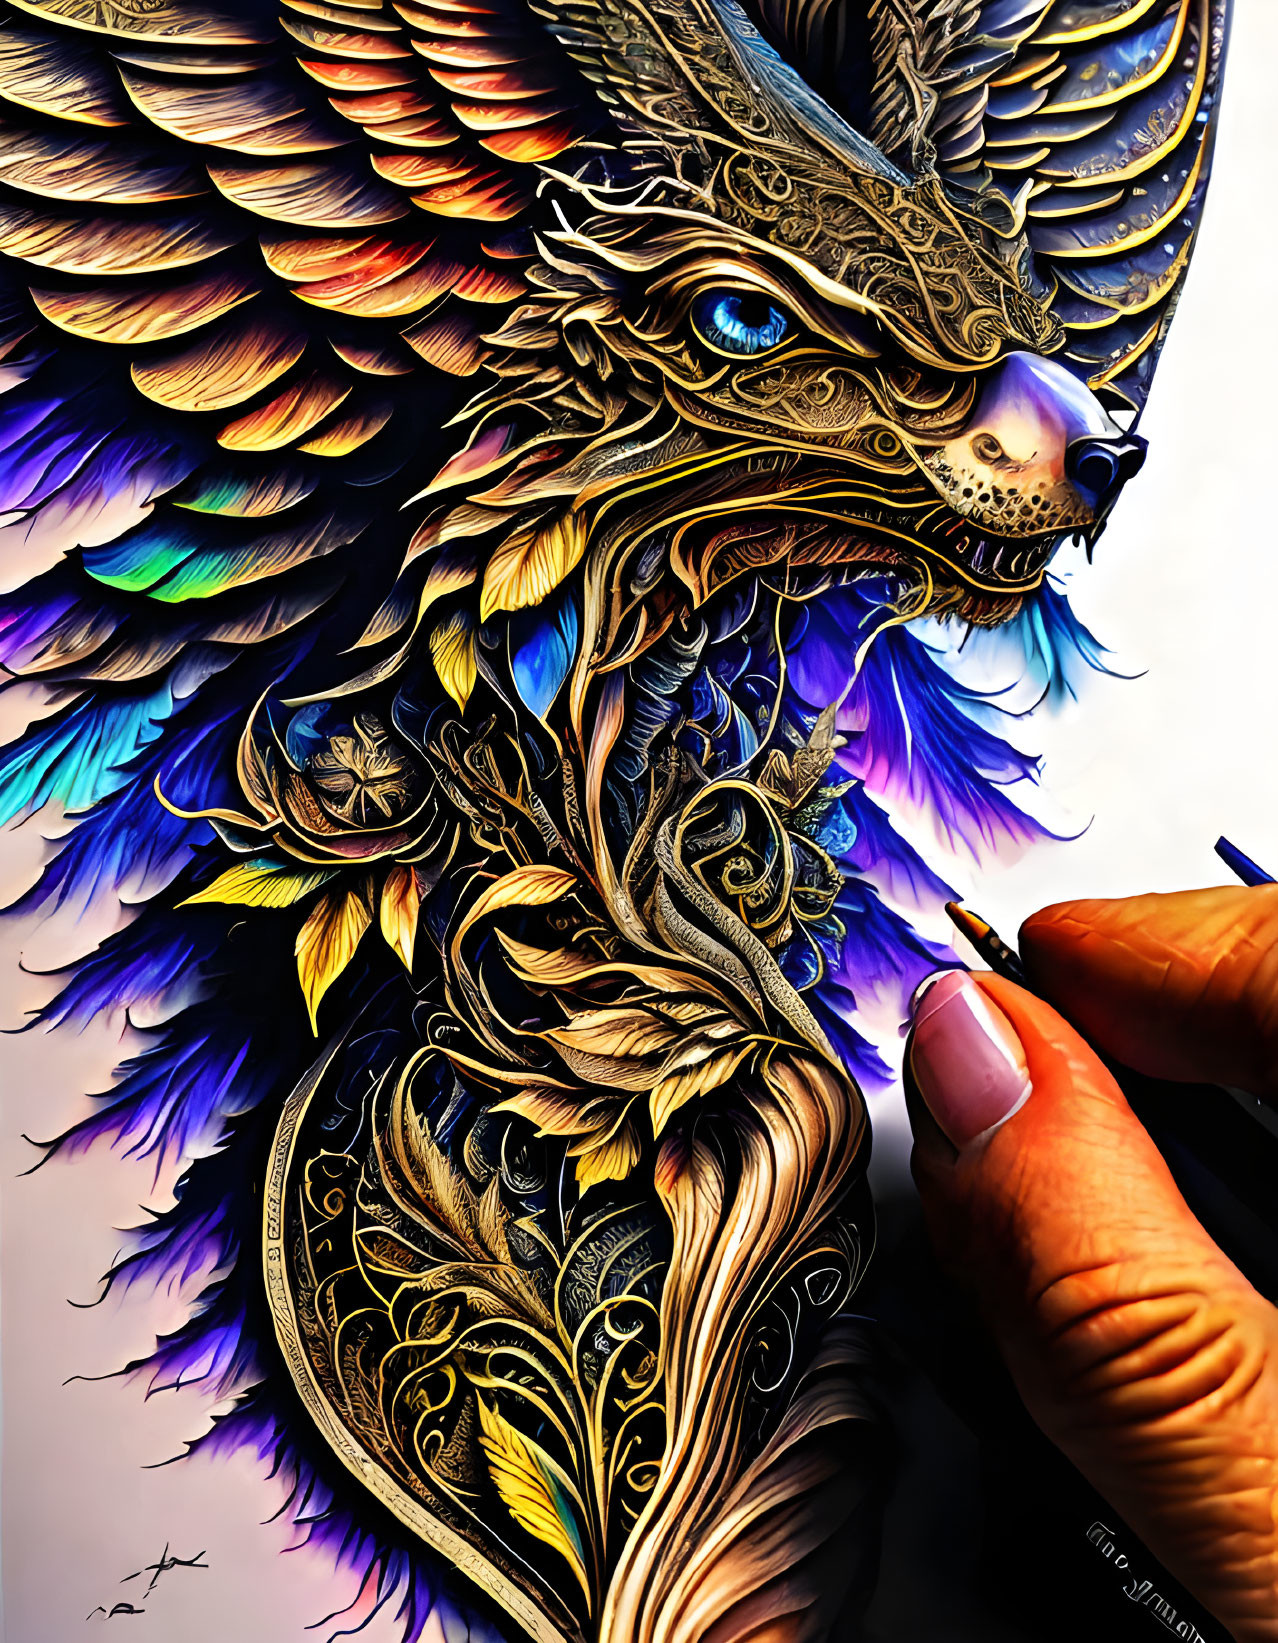 Detailed Mythological Creature Illustration with Wings Being Drawn in Colorful Style